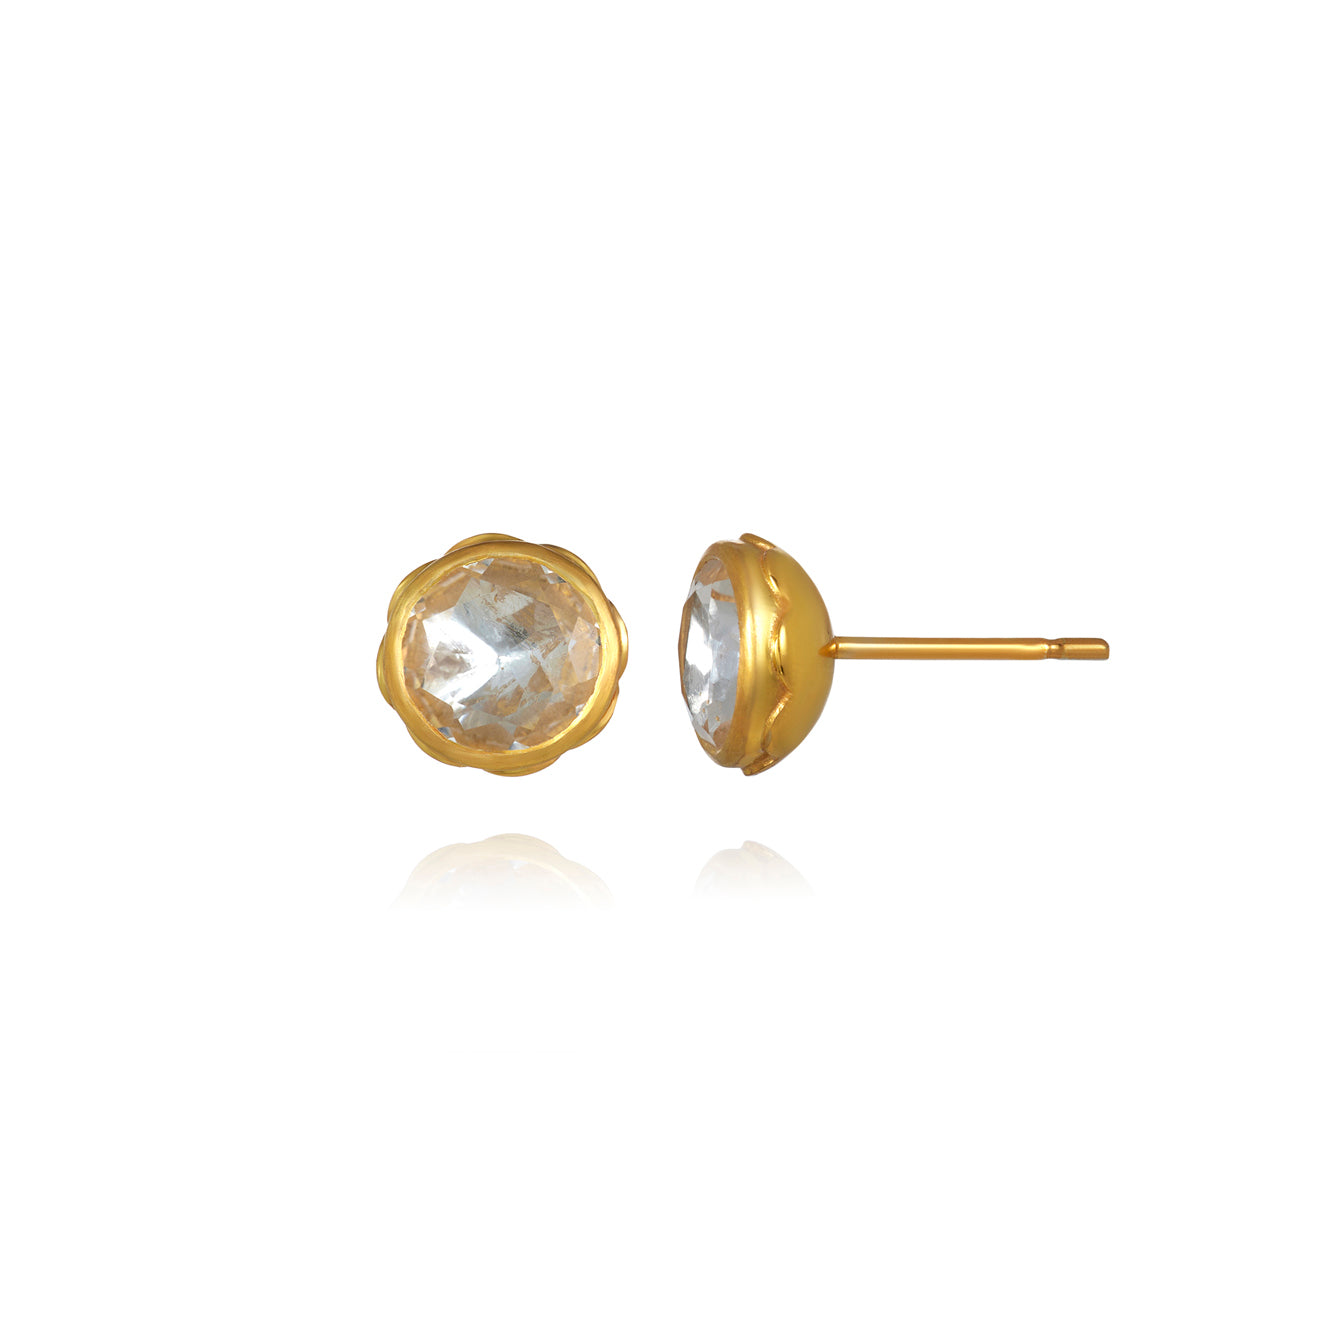 Catherine Round Stud Earrings (Black Rhodium or Yellow Gold Wash)